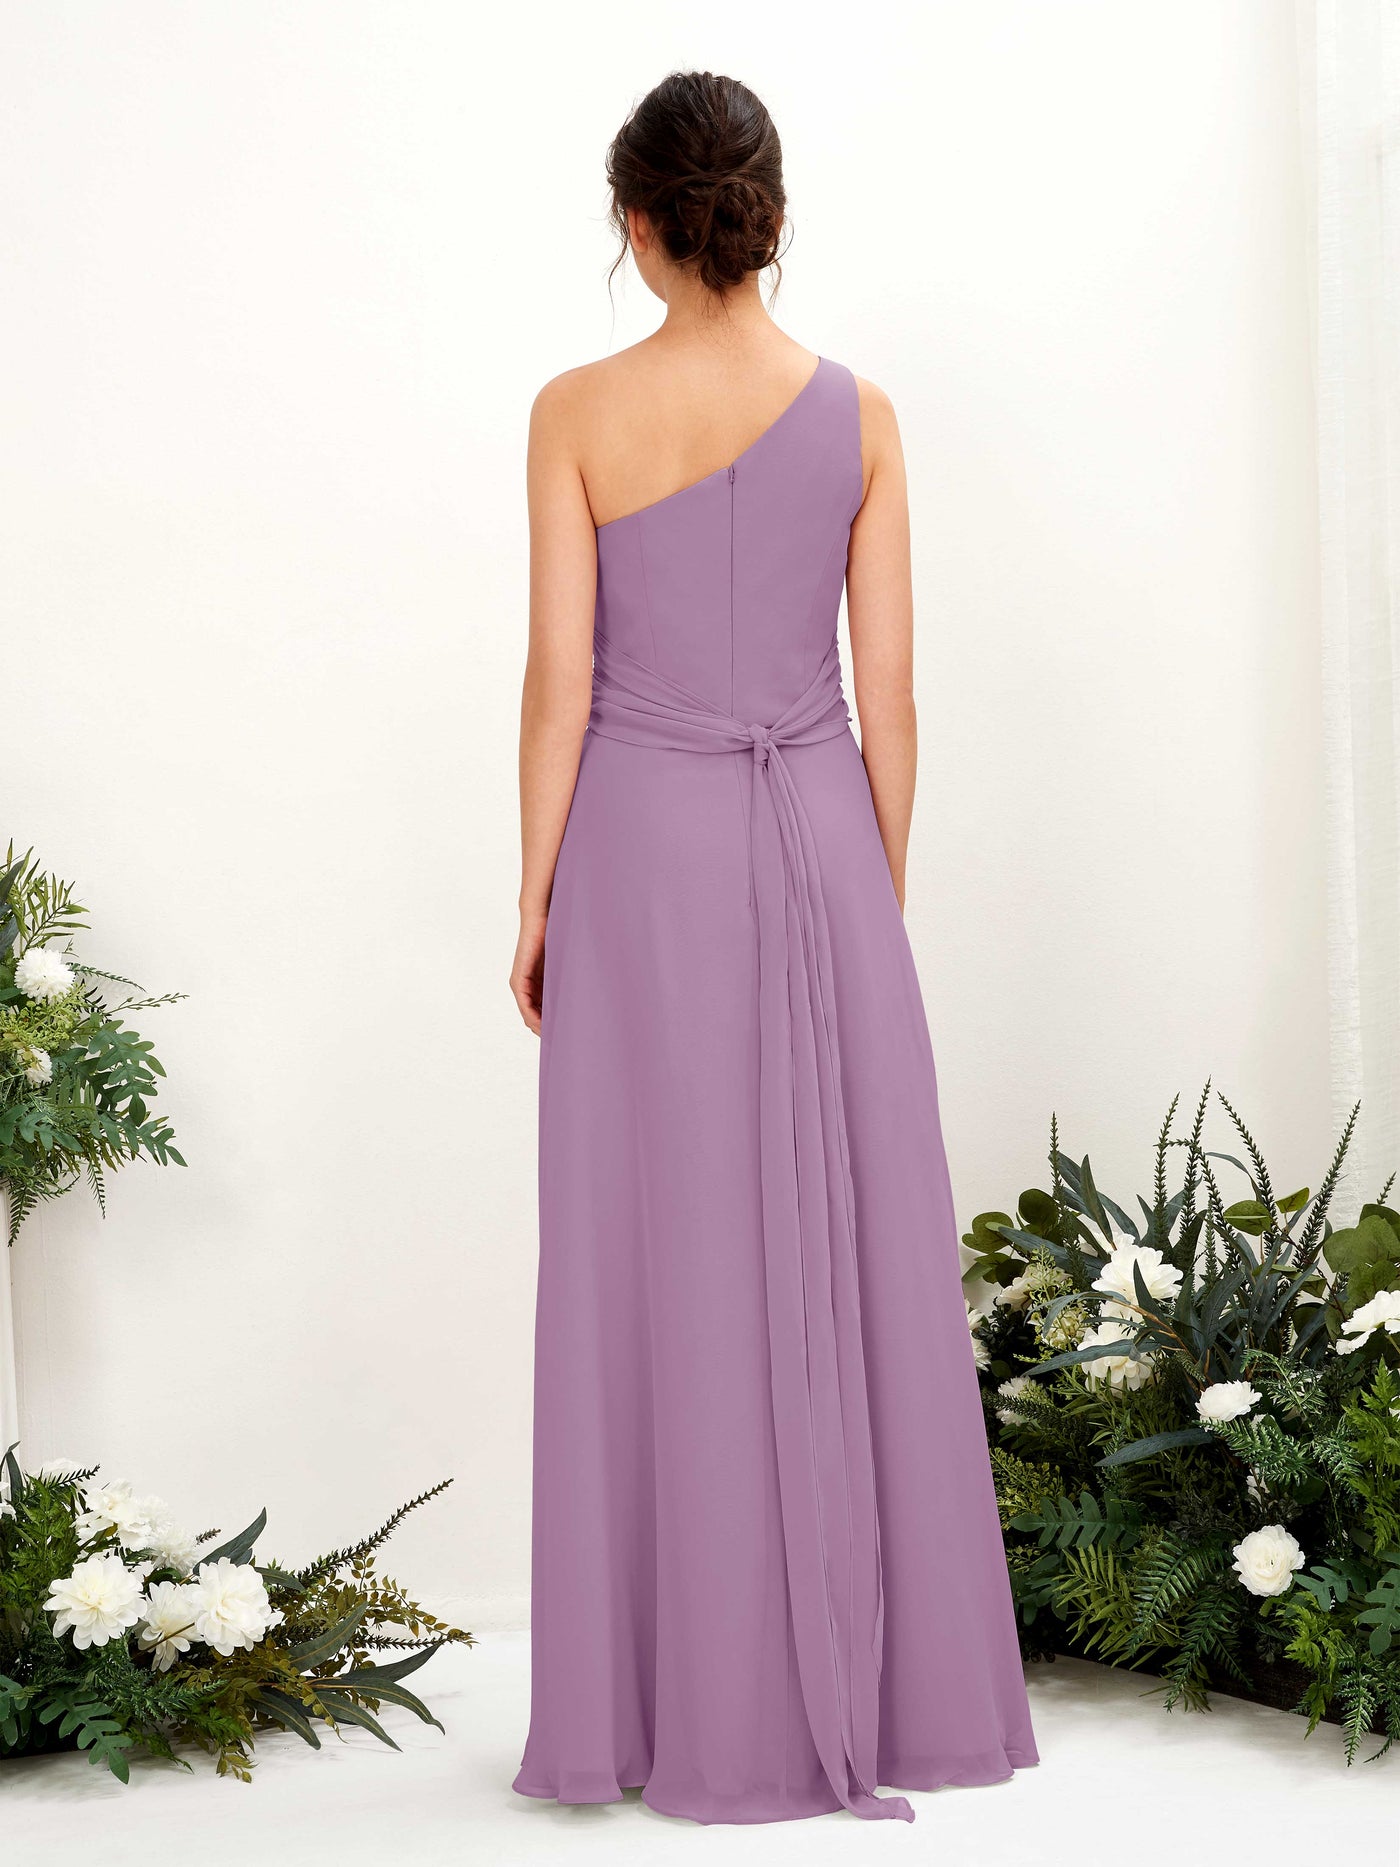 Orchid Mist Bridesmaid Dresses Bridesmaid Dress A-line Chiffon One Shoulder Full Length Sleeveless Wedding Party Dress (81224721)#color_orchid-mist